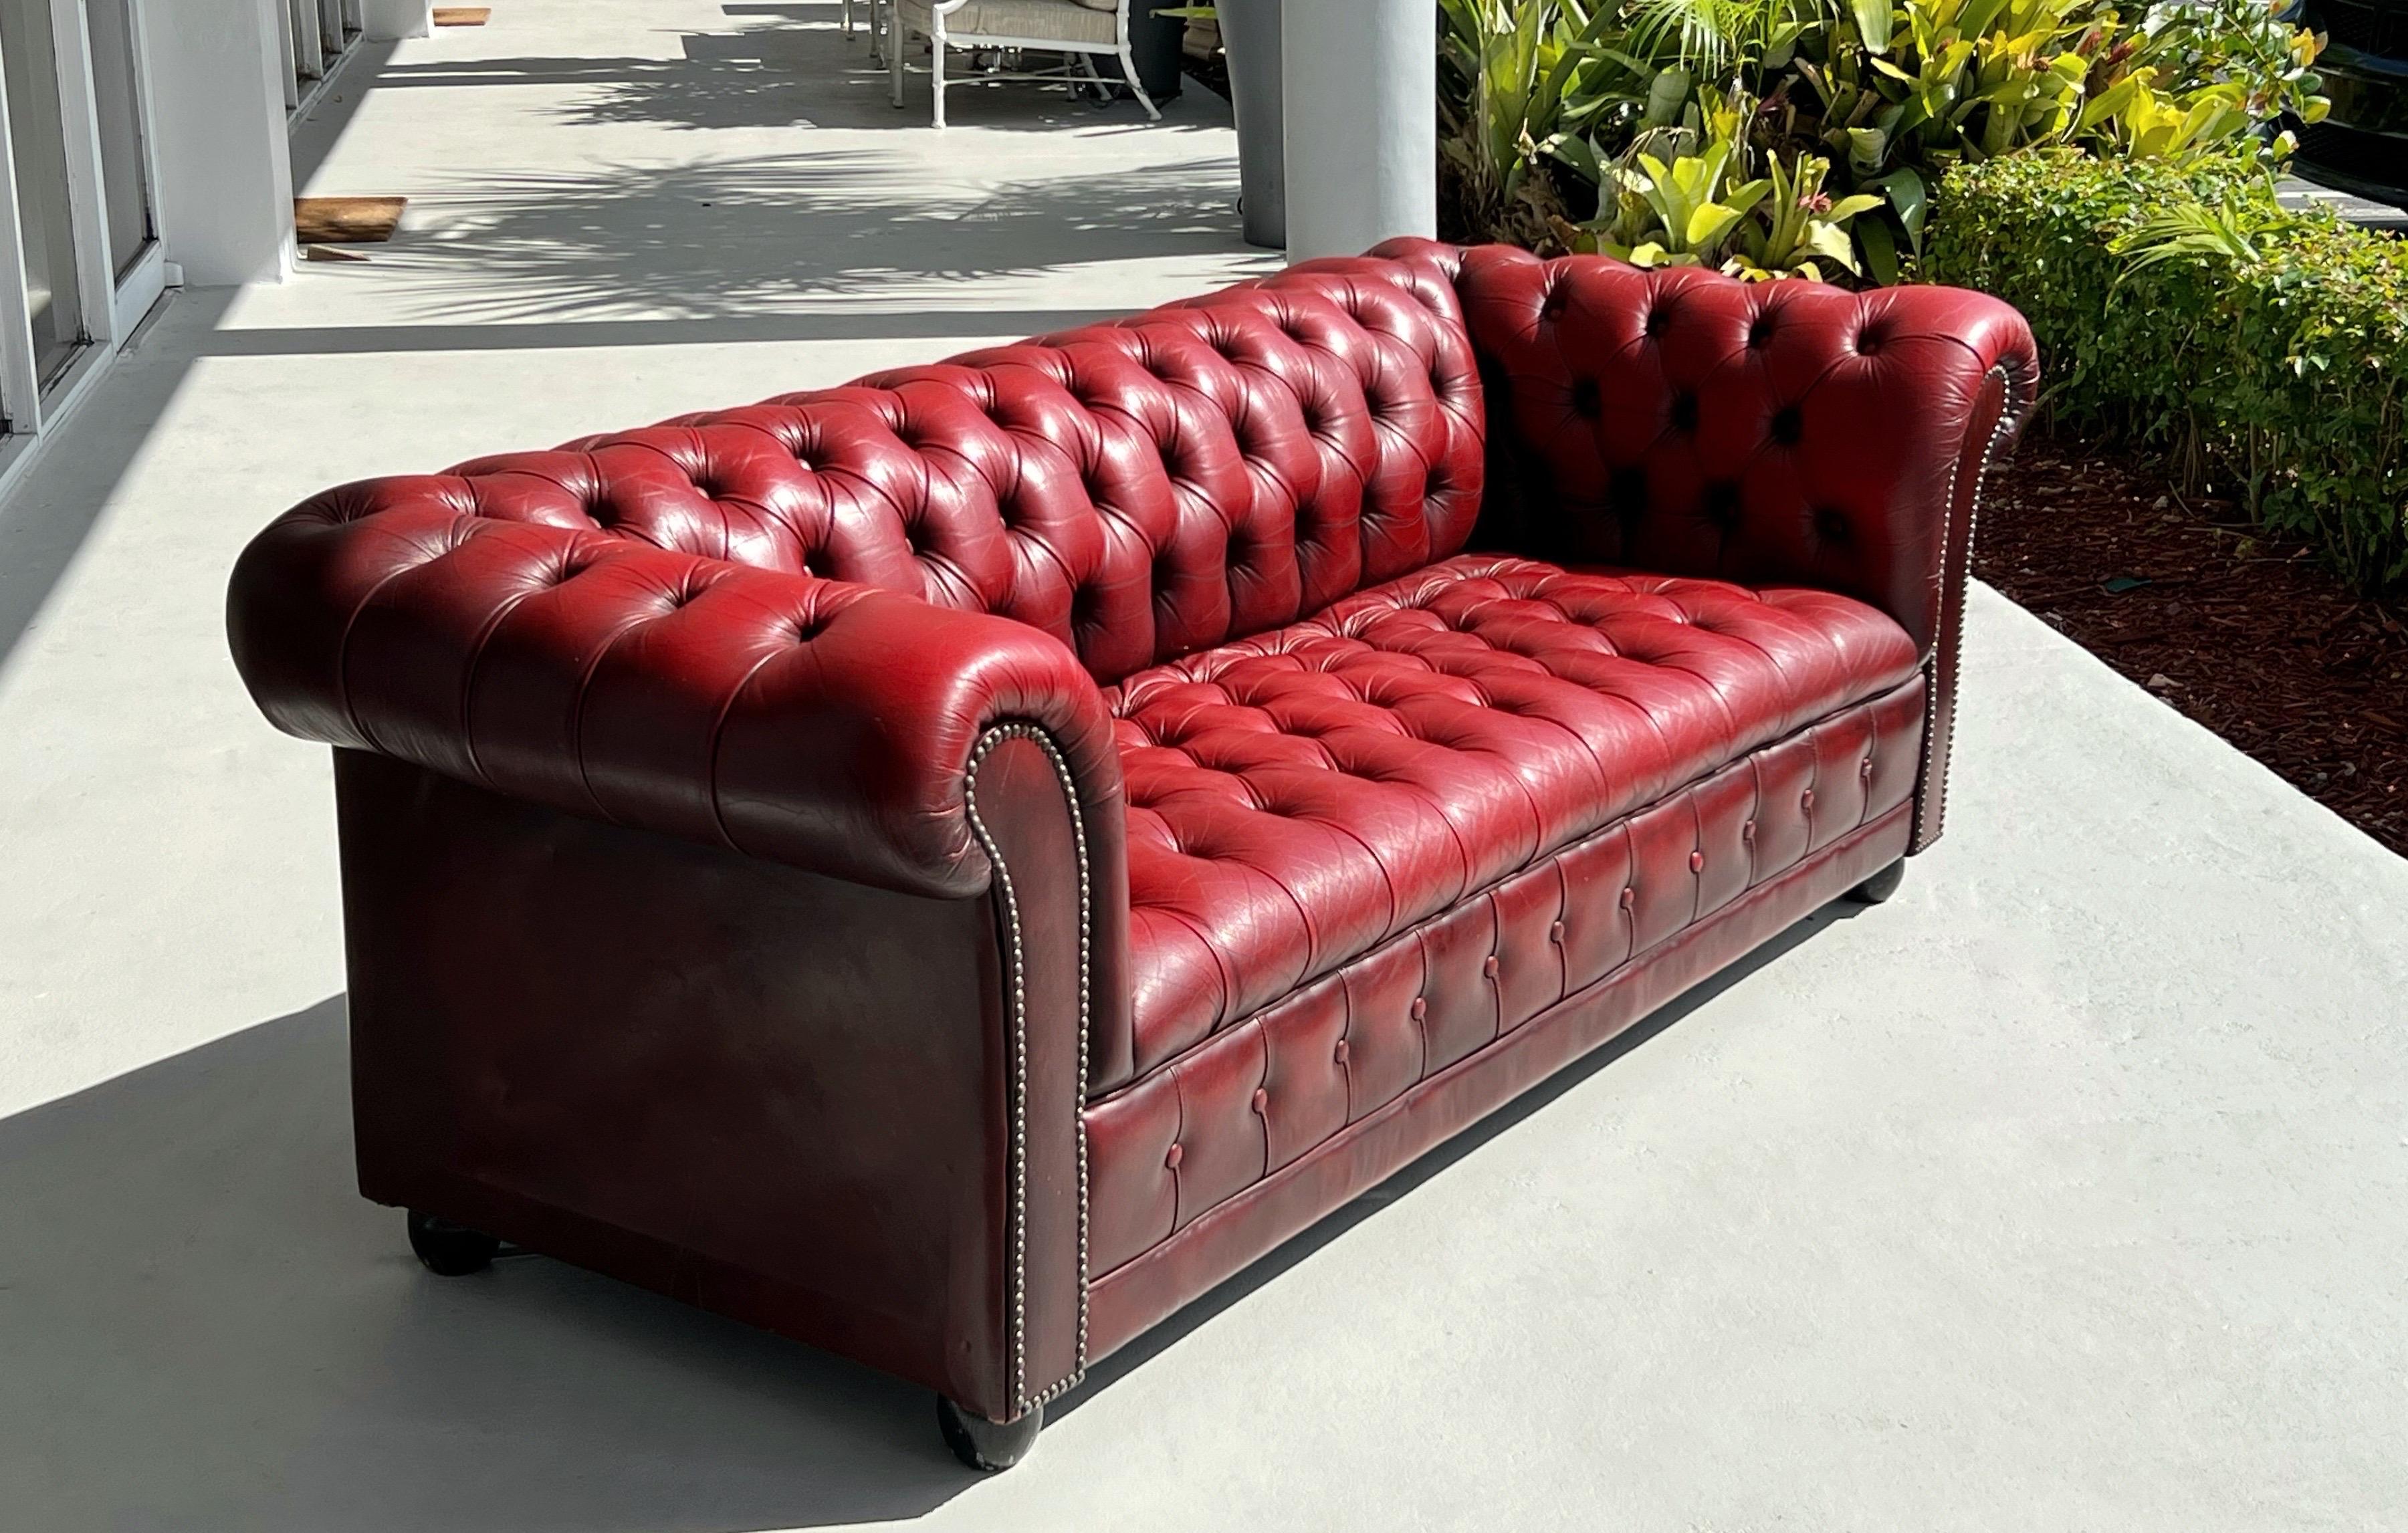 A vintage red leather chesterfield sofa. In very good original condition with that easy on the eye quality that only time and loving care can achieve.